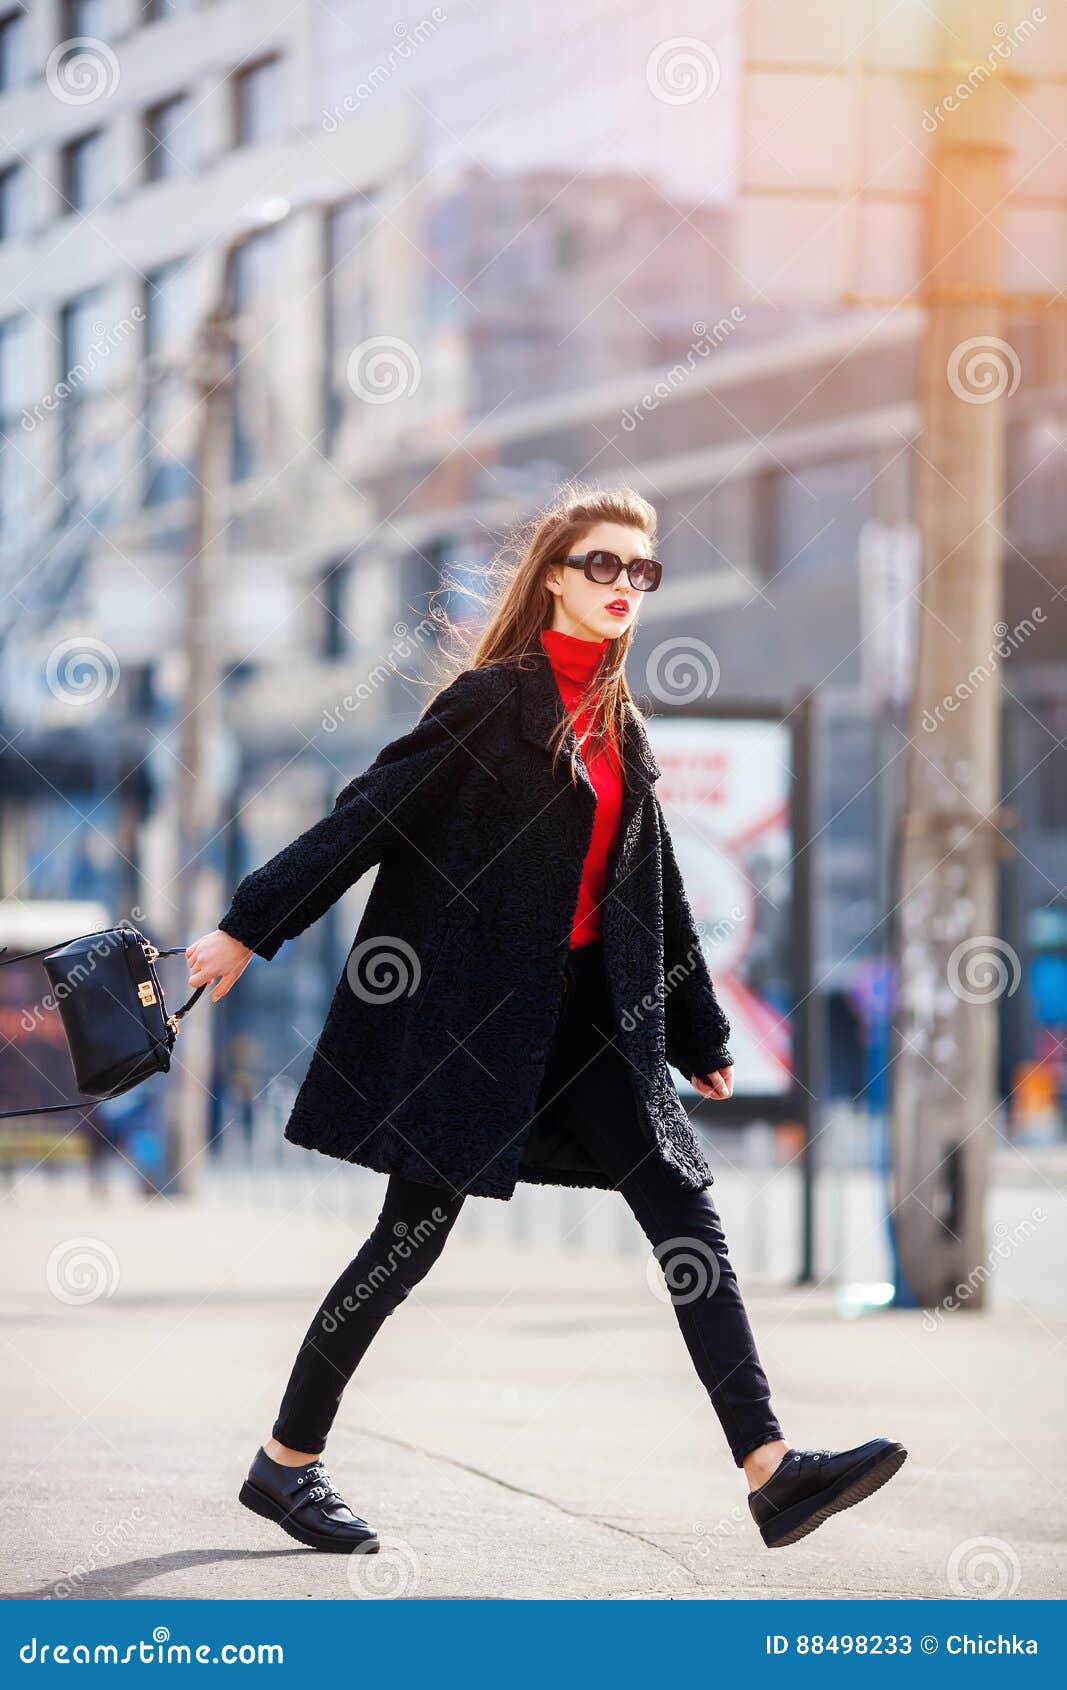 attractive woman in autumn style trendy outfit walking in street